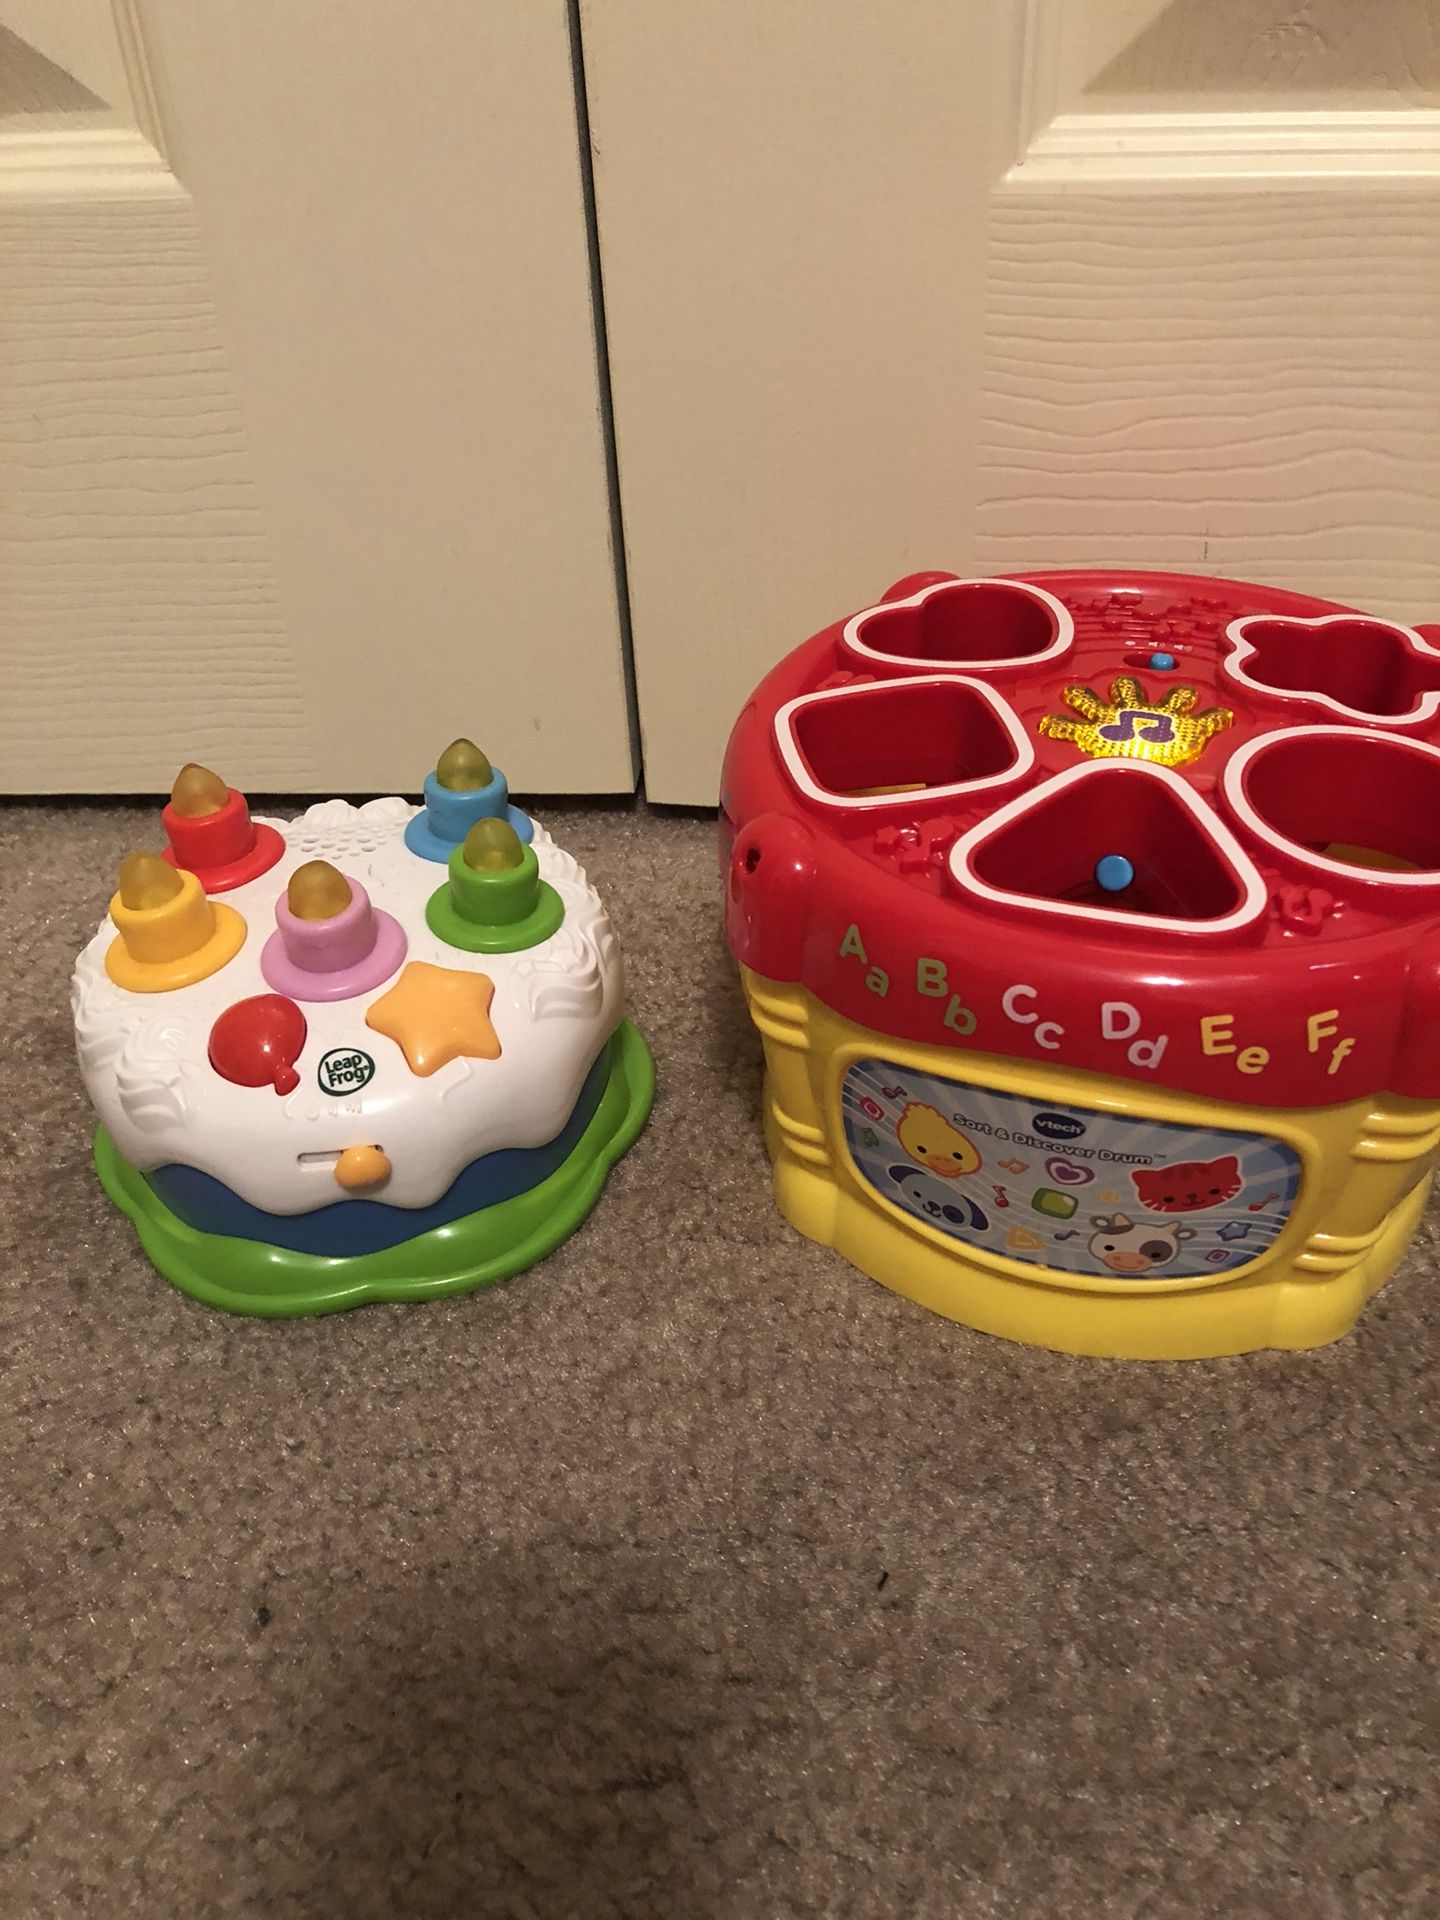 Toys $10 for both